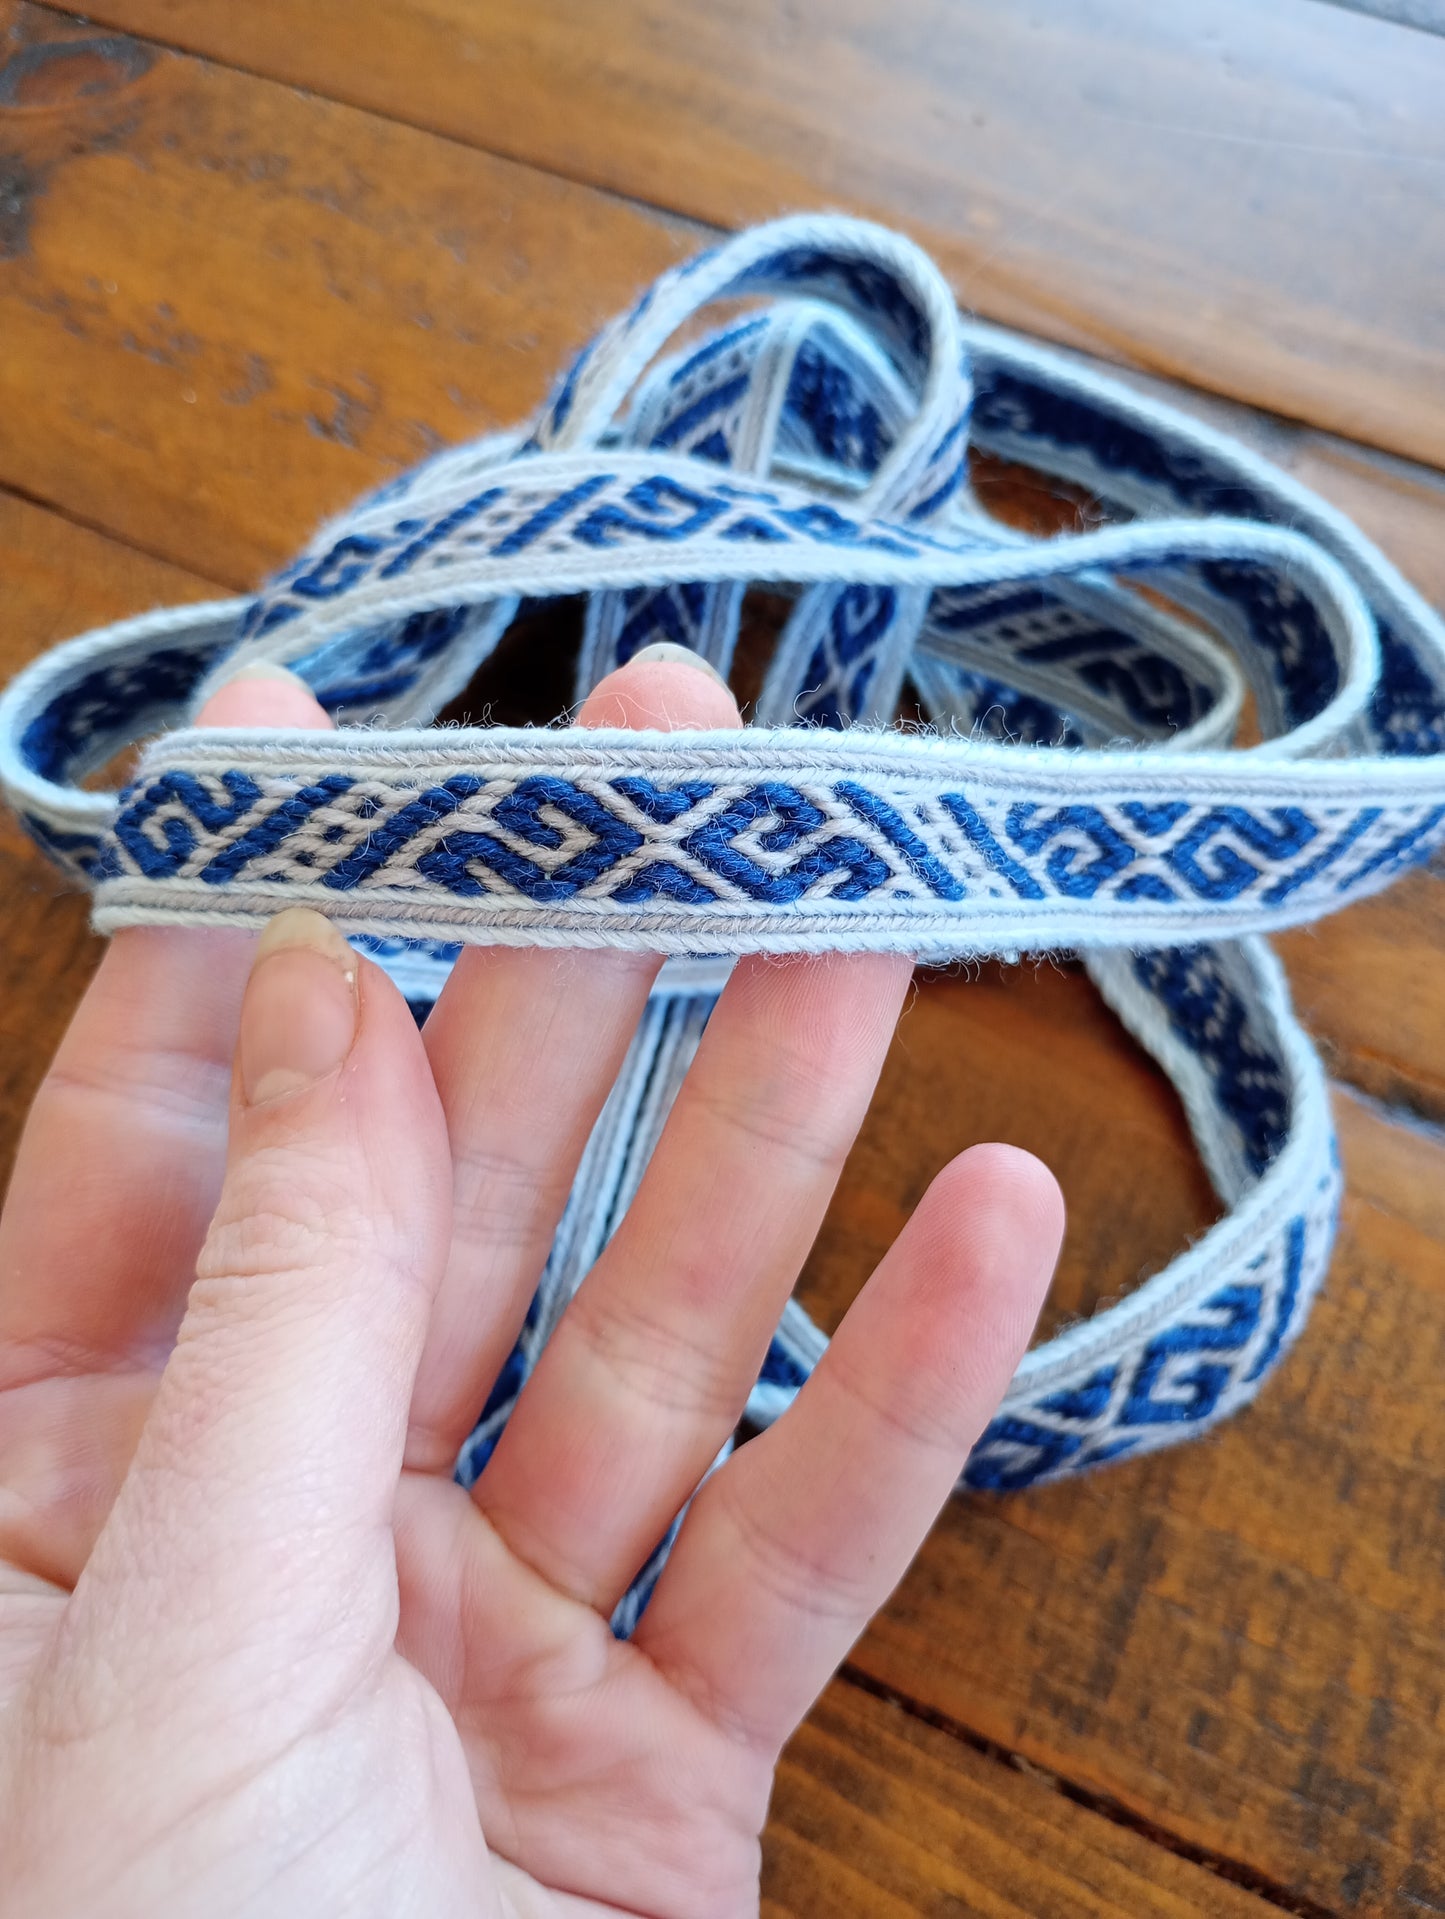 Belt with historical Latvian pattern in blue and gray